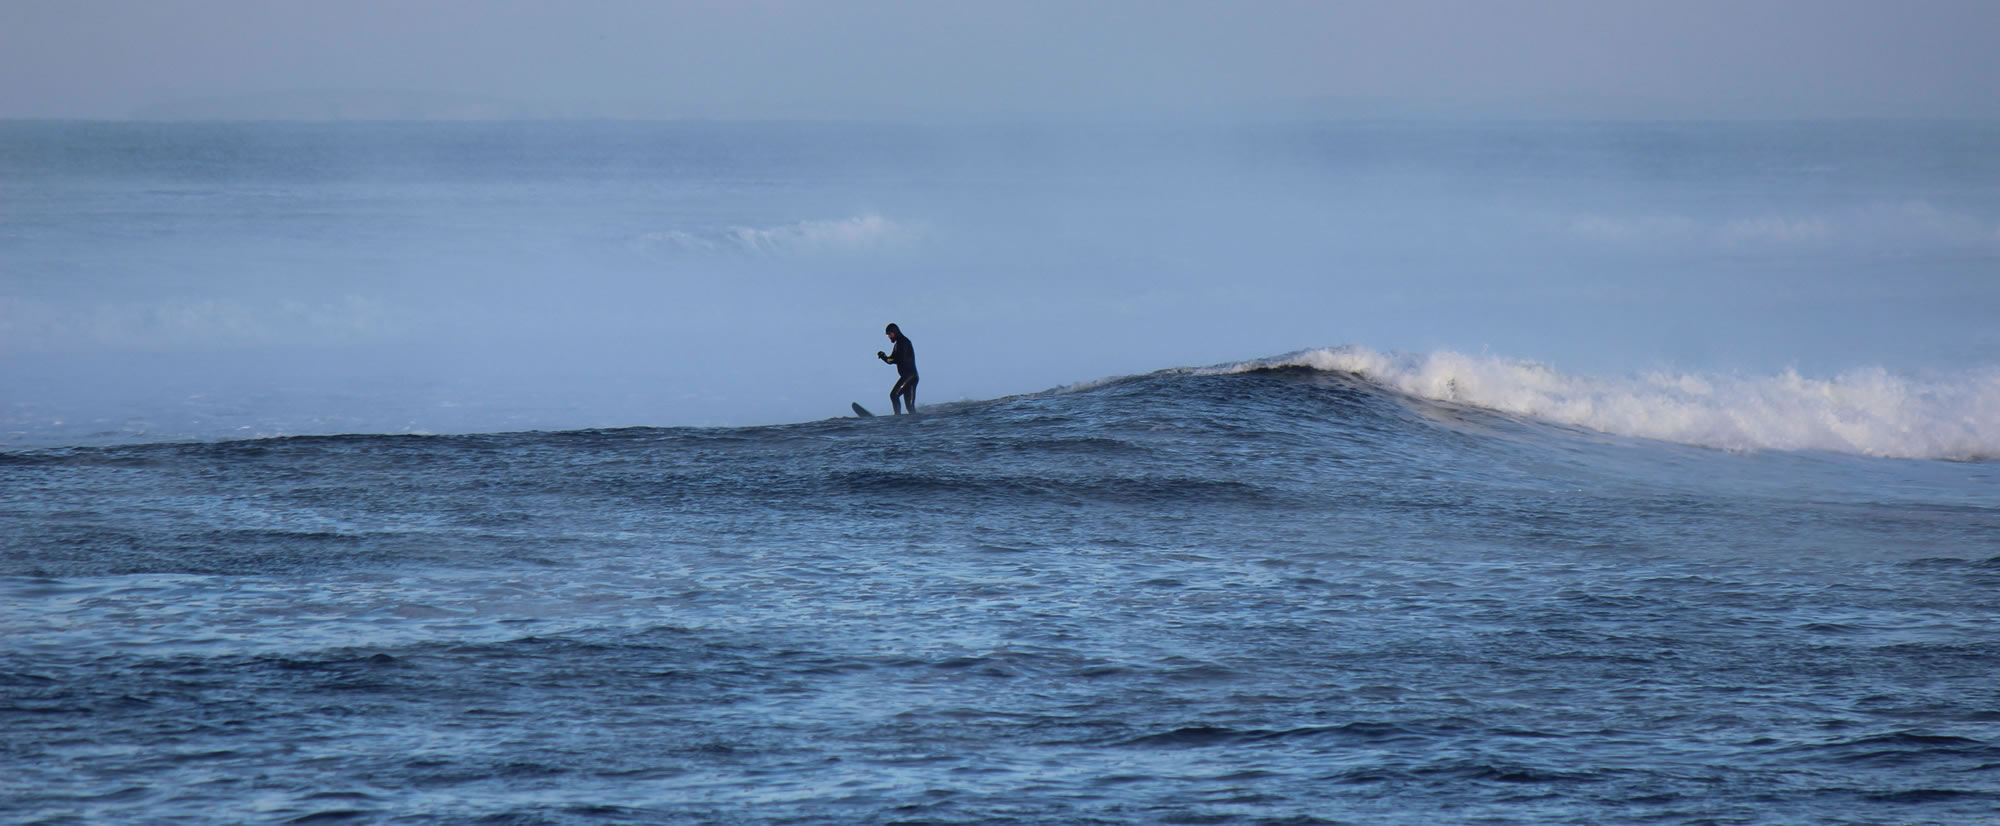 Caithness | Surfing and outdoor adventures await visitors to Caithness